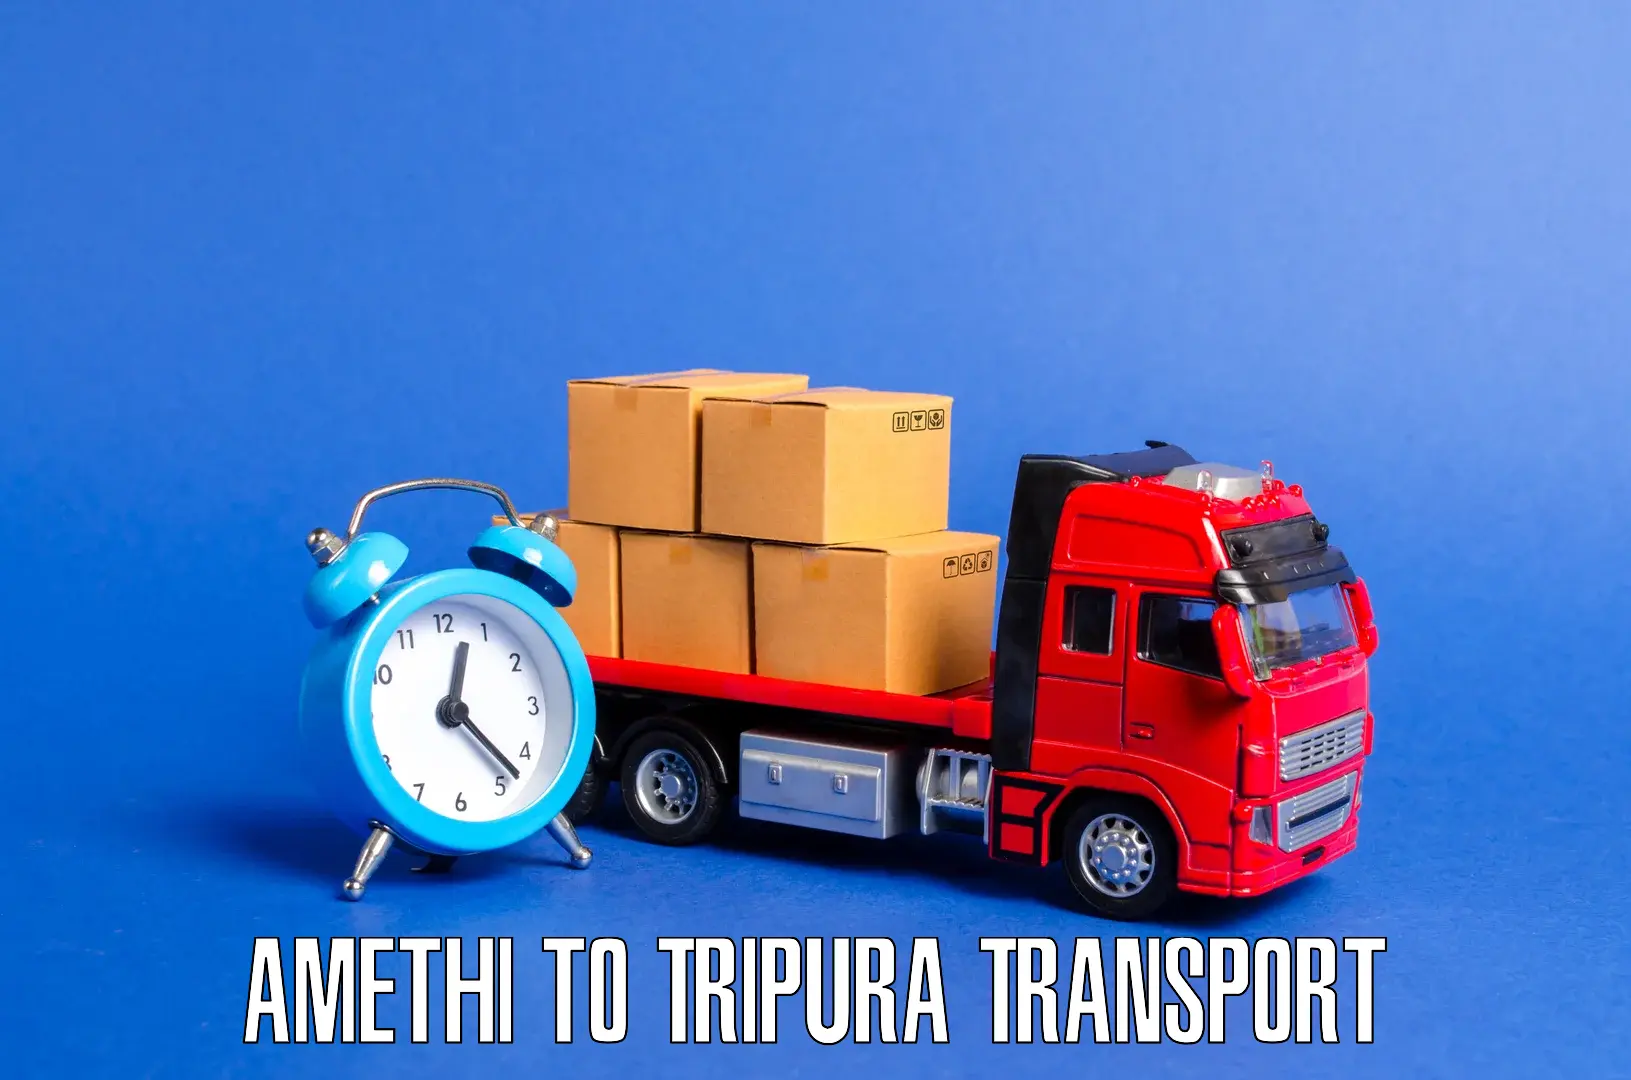 Transport bike from one state to another Amethi to Tripura